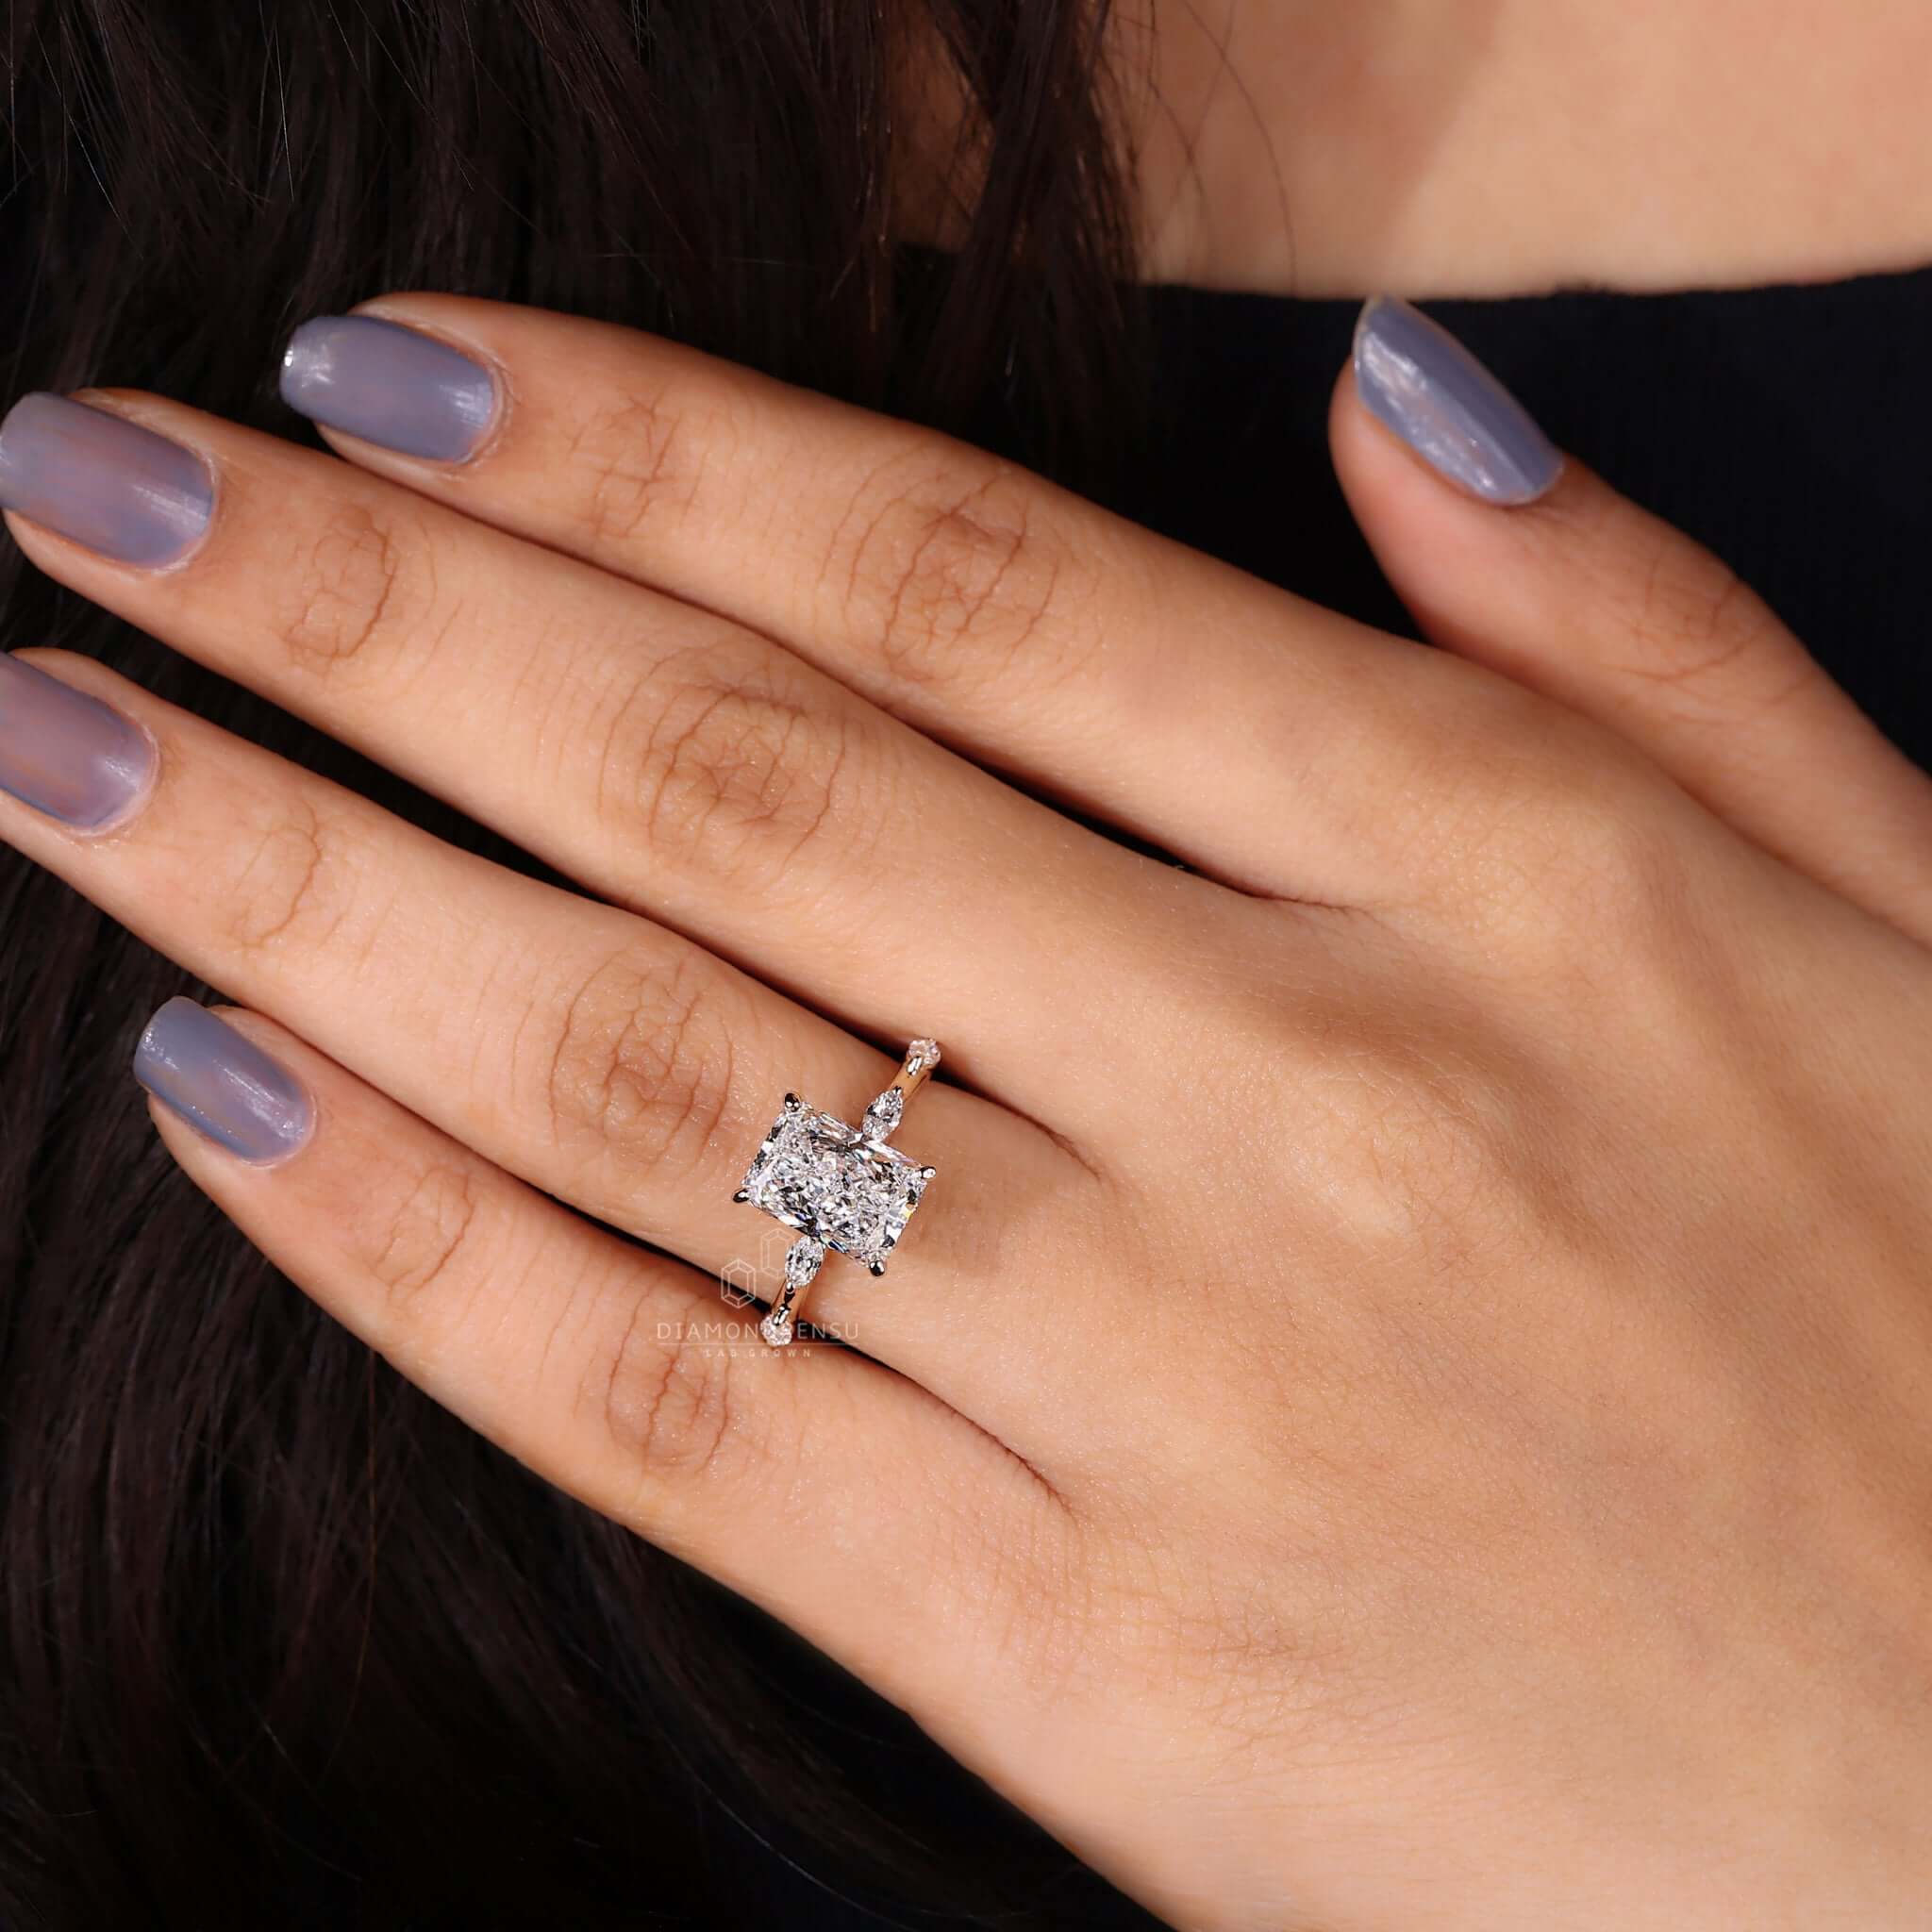 Gorgeous hidden halo setting on an engagement ring, subtly enhancing the ring's brilliance